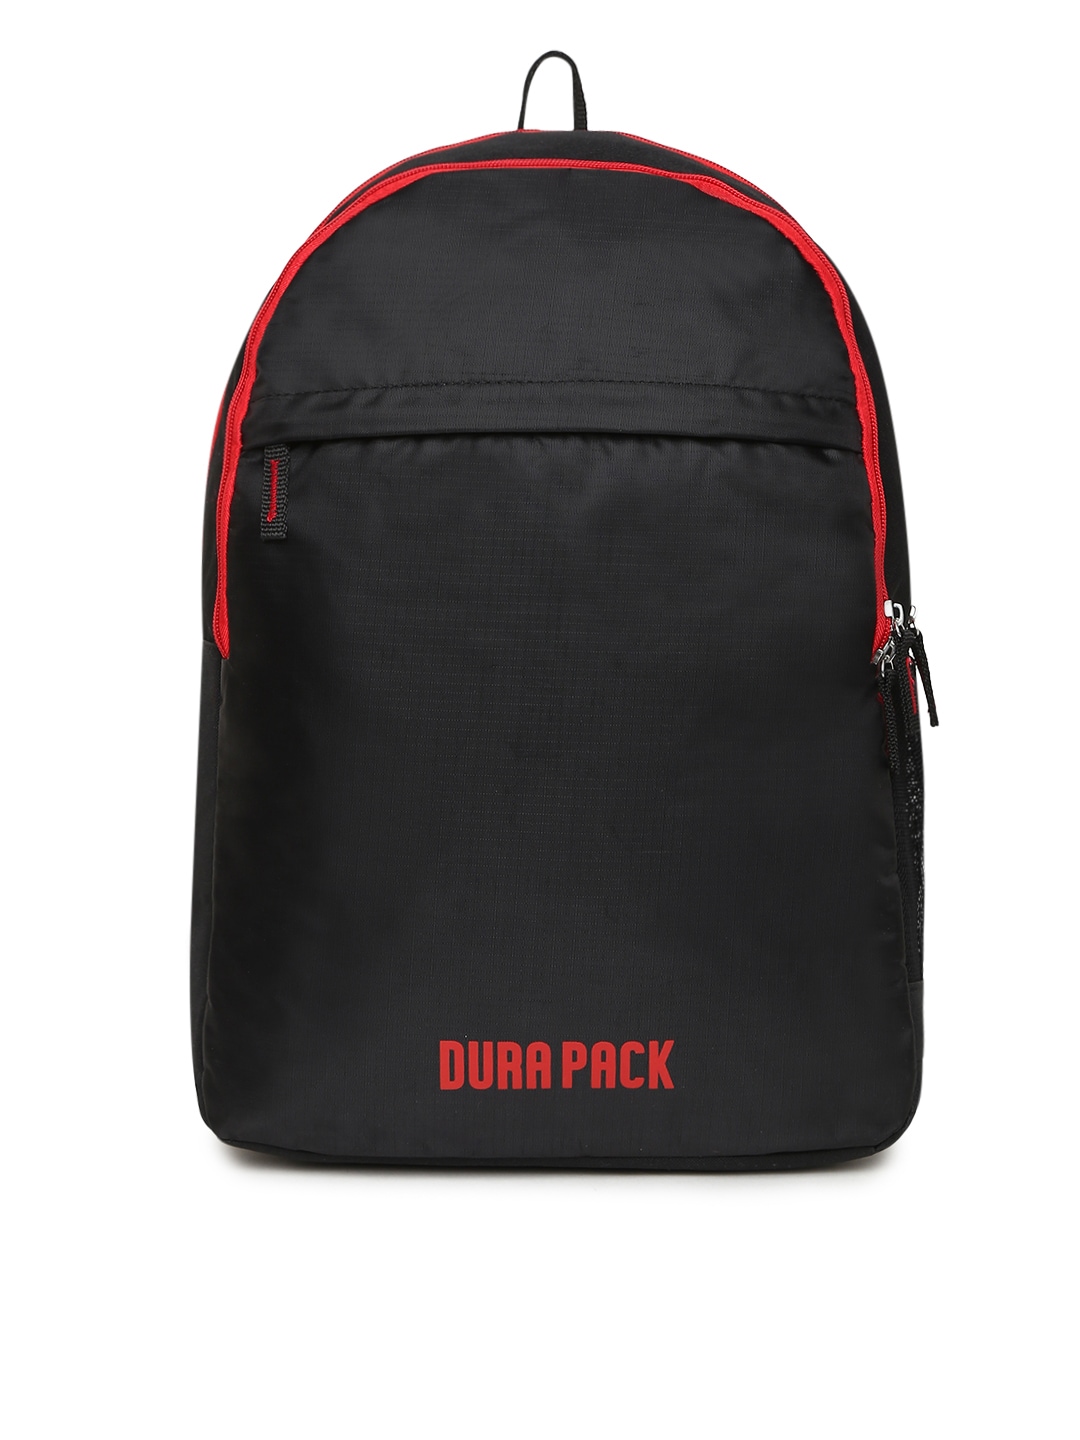 Durapack Unisex Black Solid Backpack Price in India